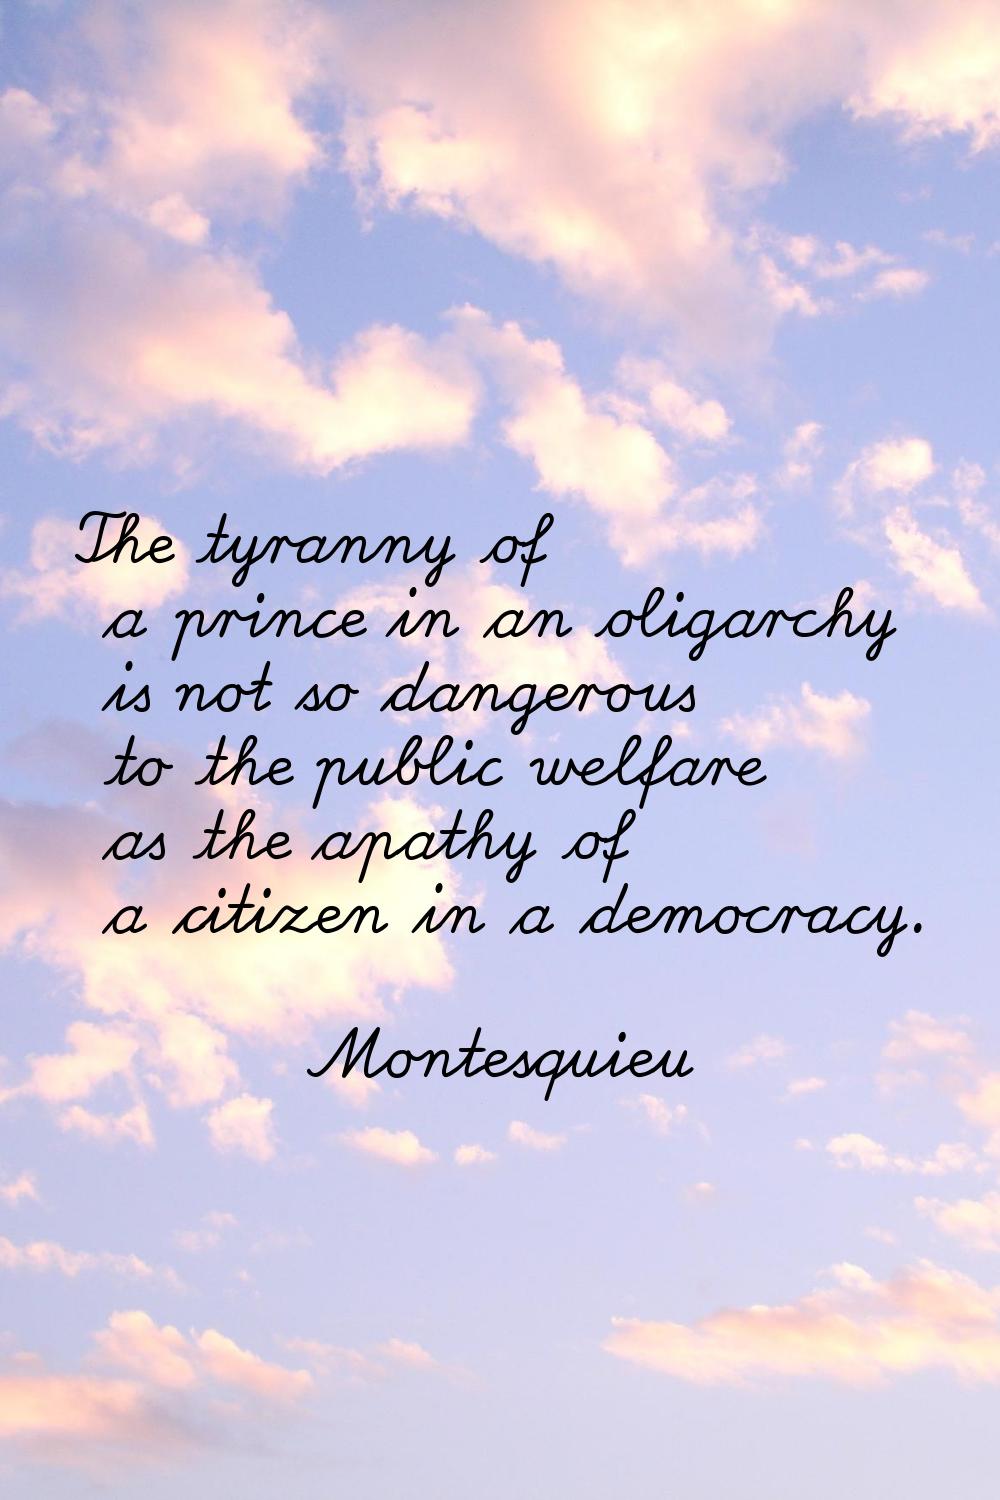 The tyranny of a prince in an oligarchy is not so dangerous to the public welfare as the apathy of 